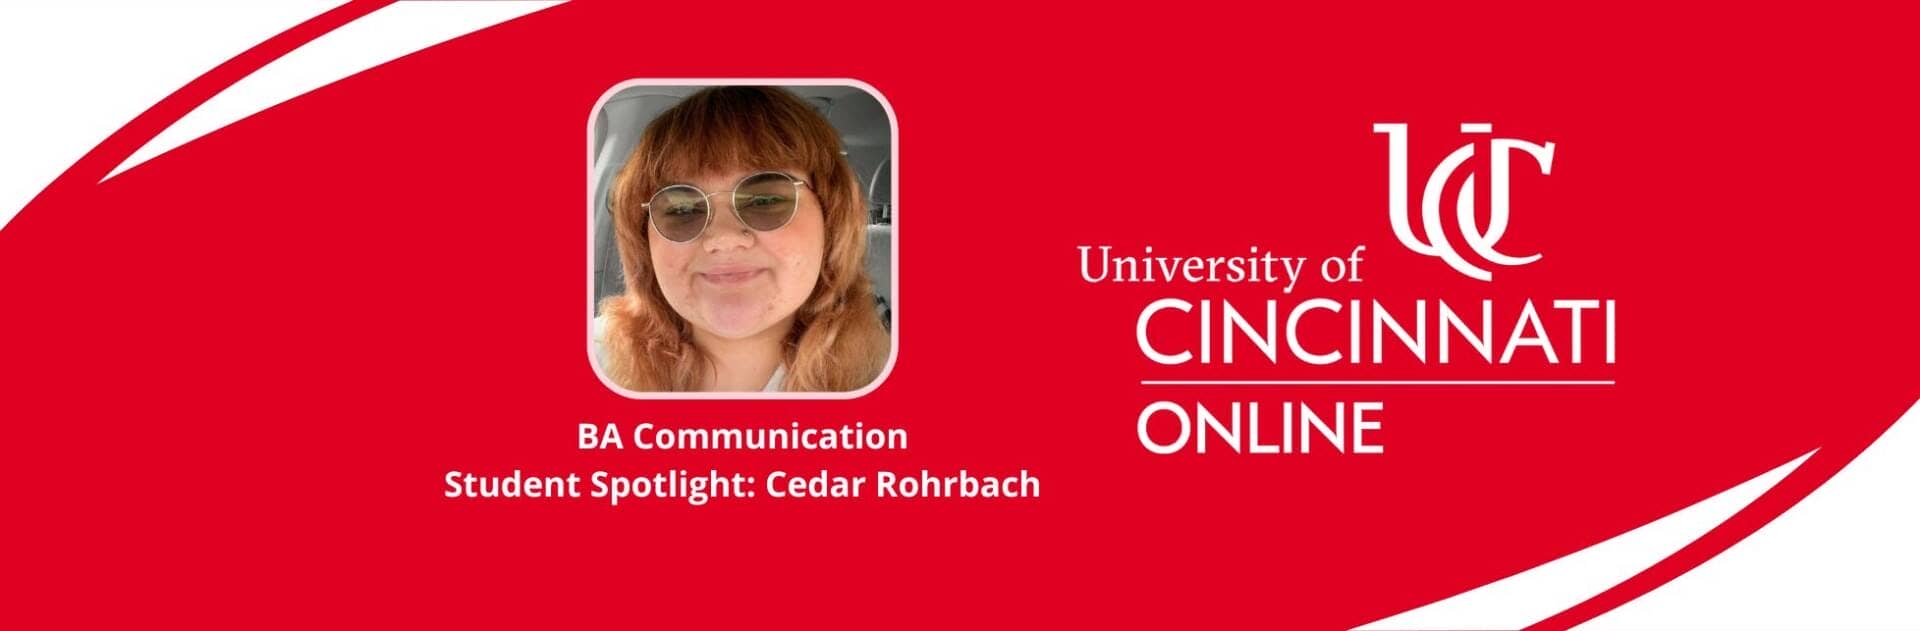 This is an image containing a headshot of our featured student, Cedar Rohrbach. They are wearing circular glasses and a t-shirt. The University of Cincinnati logo is also in this image, with a red background.